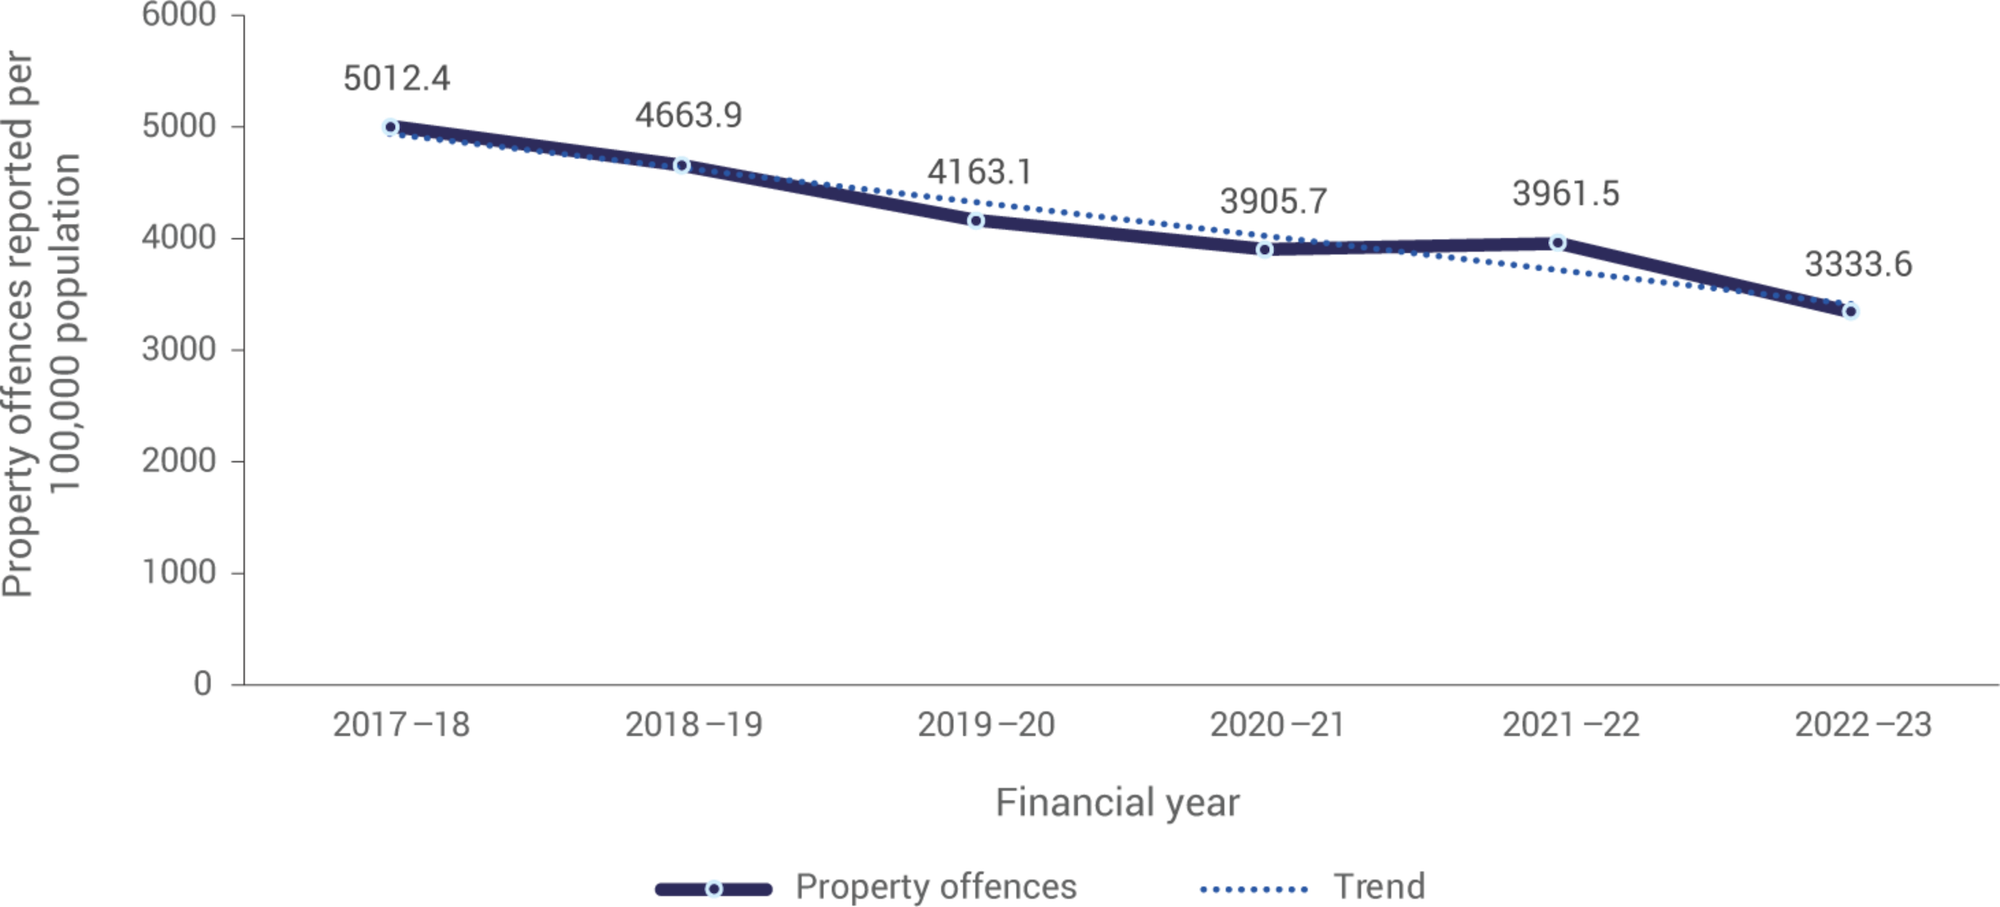 This Figure is a line graph depicting offences reported against property over a six-year period, from the 2017-18 financial year to the 2022-23 financial year.